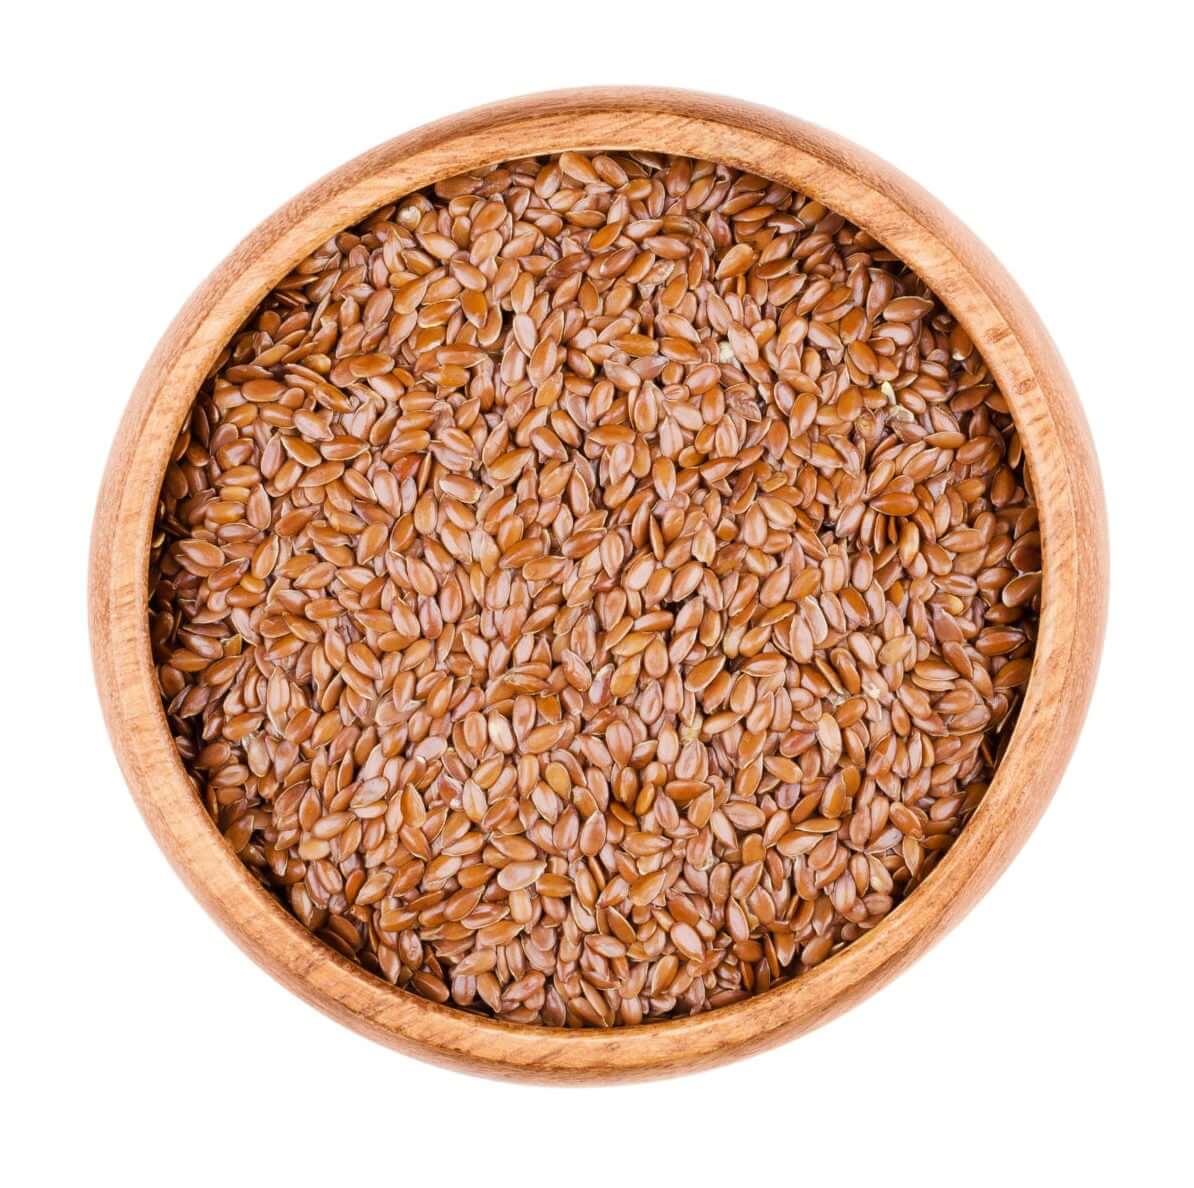 Brown flaxseeds in a wooden bowl